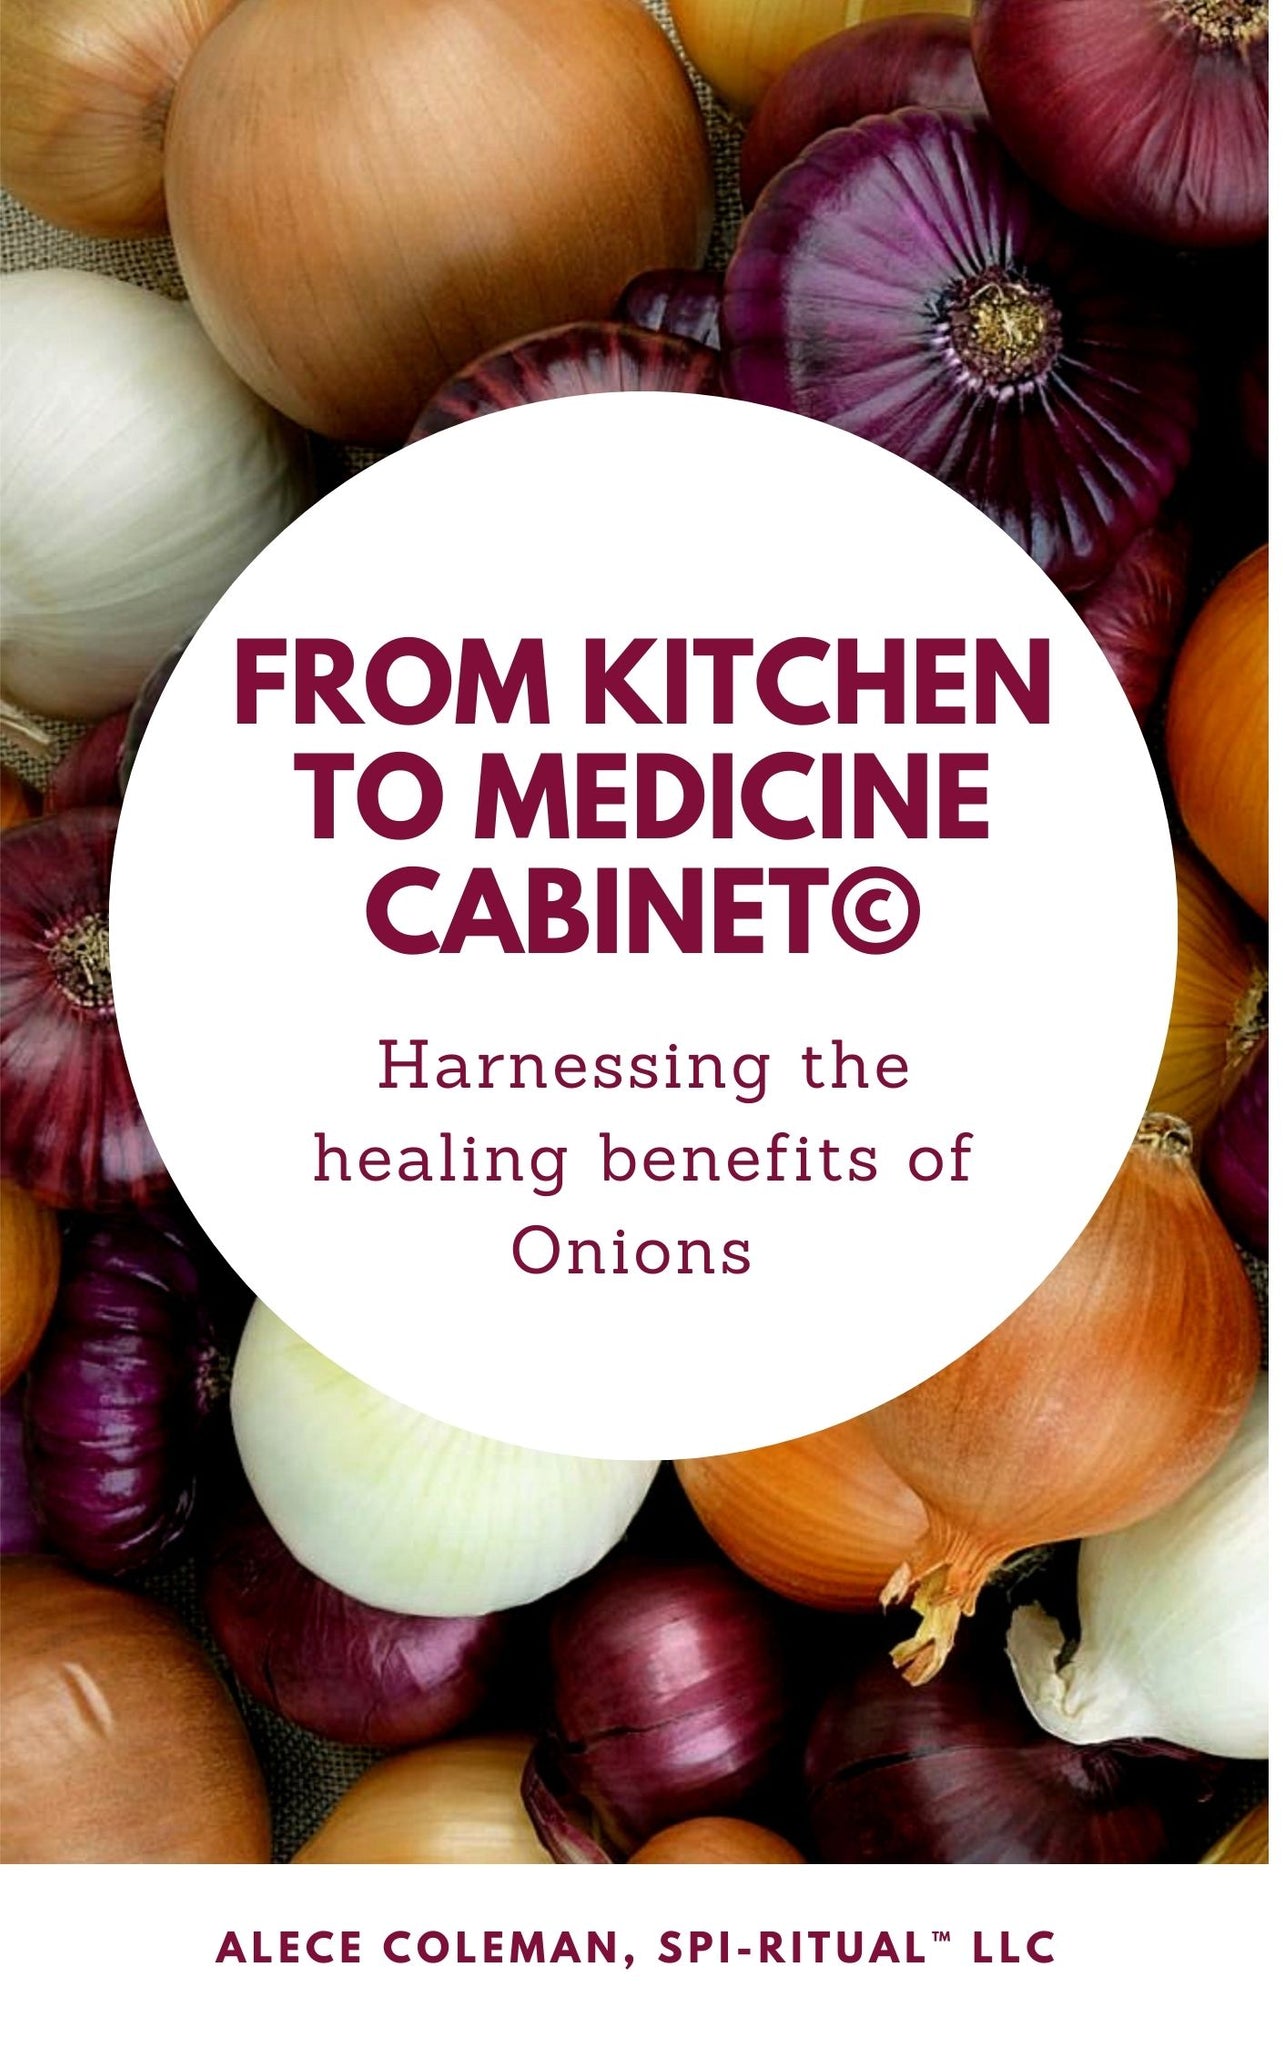 From Kitchen to medicine cabinet-Harnessing the healing benefits of onion